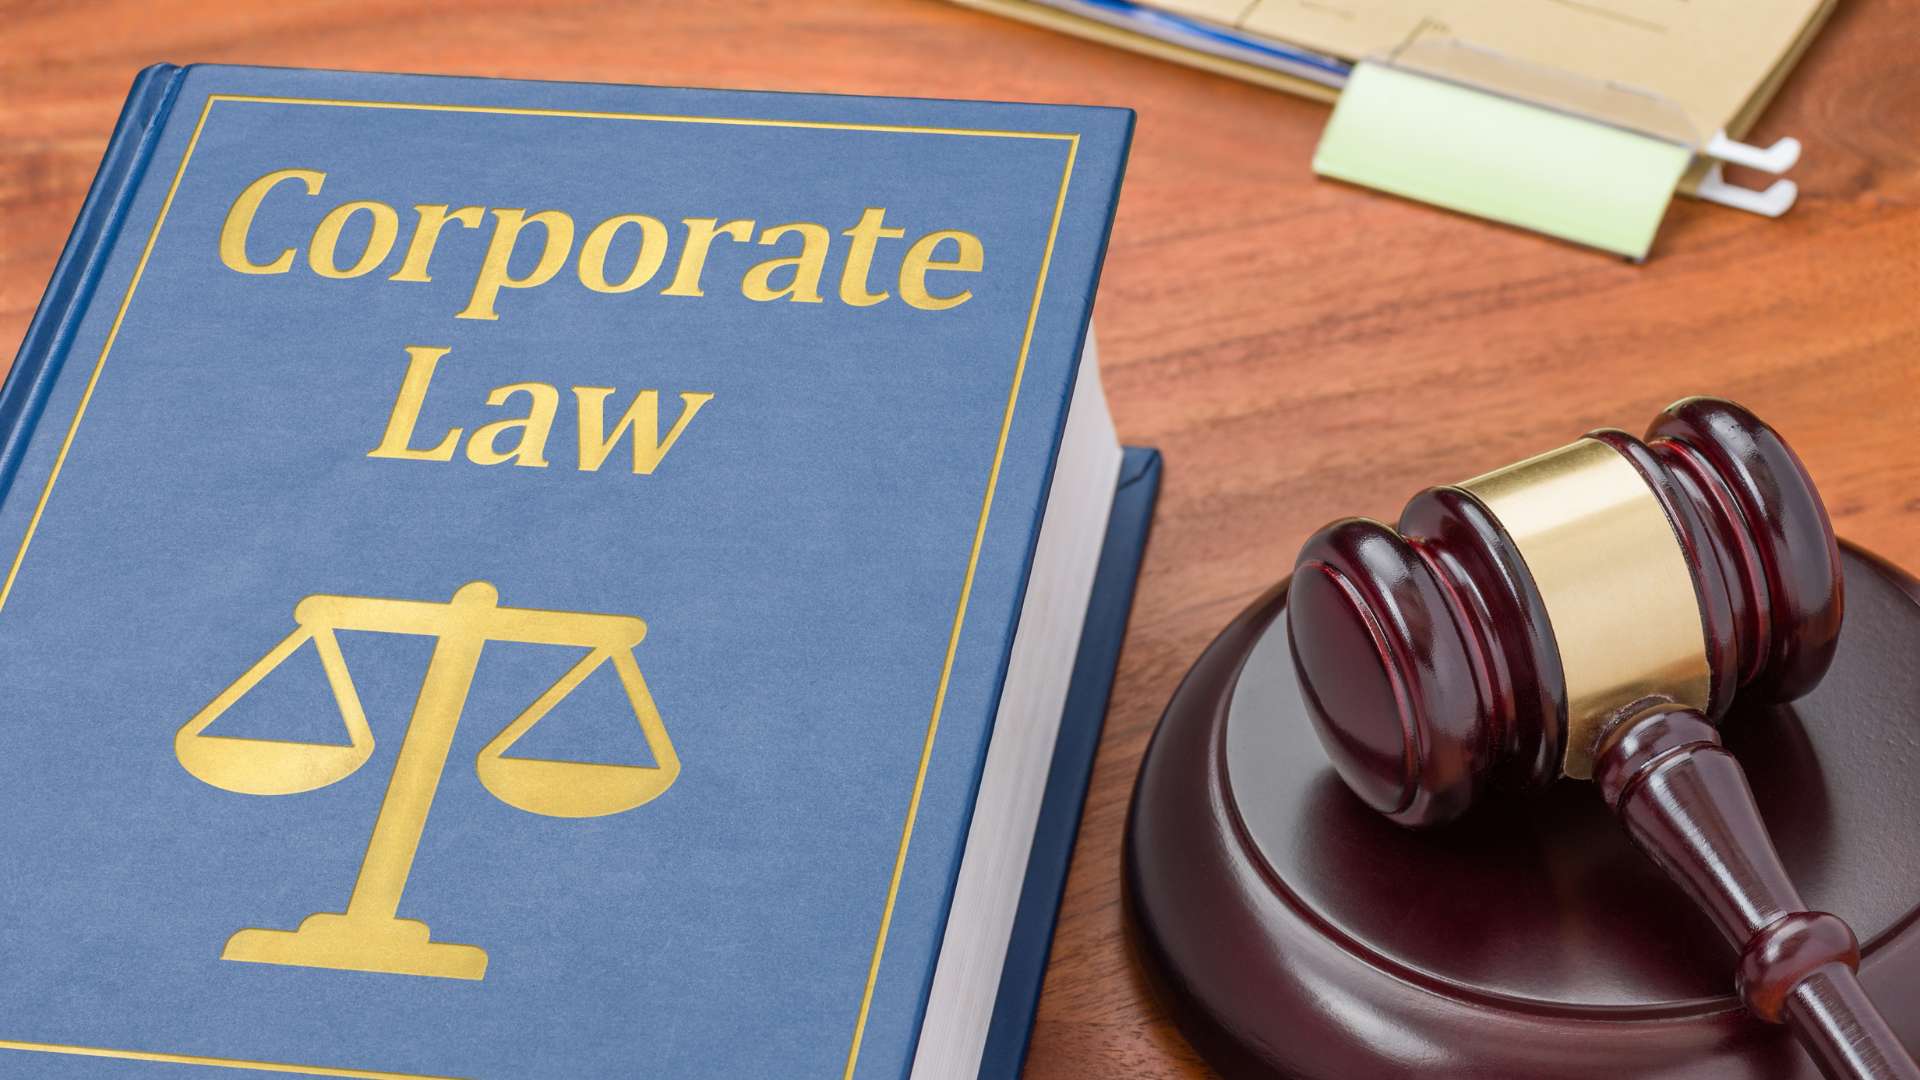 Comprehending Compliance Regulations and Corporate Law